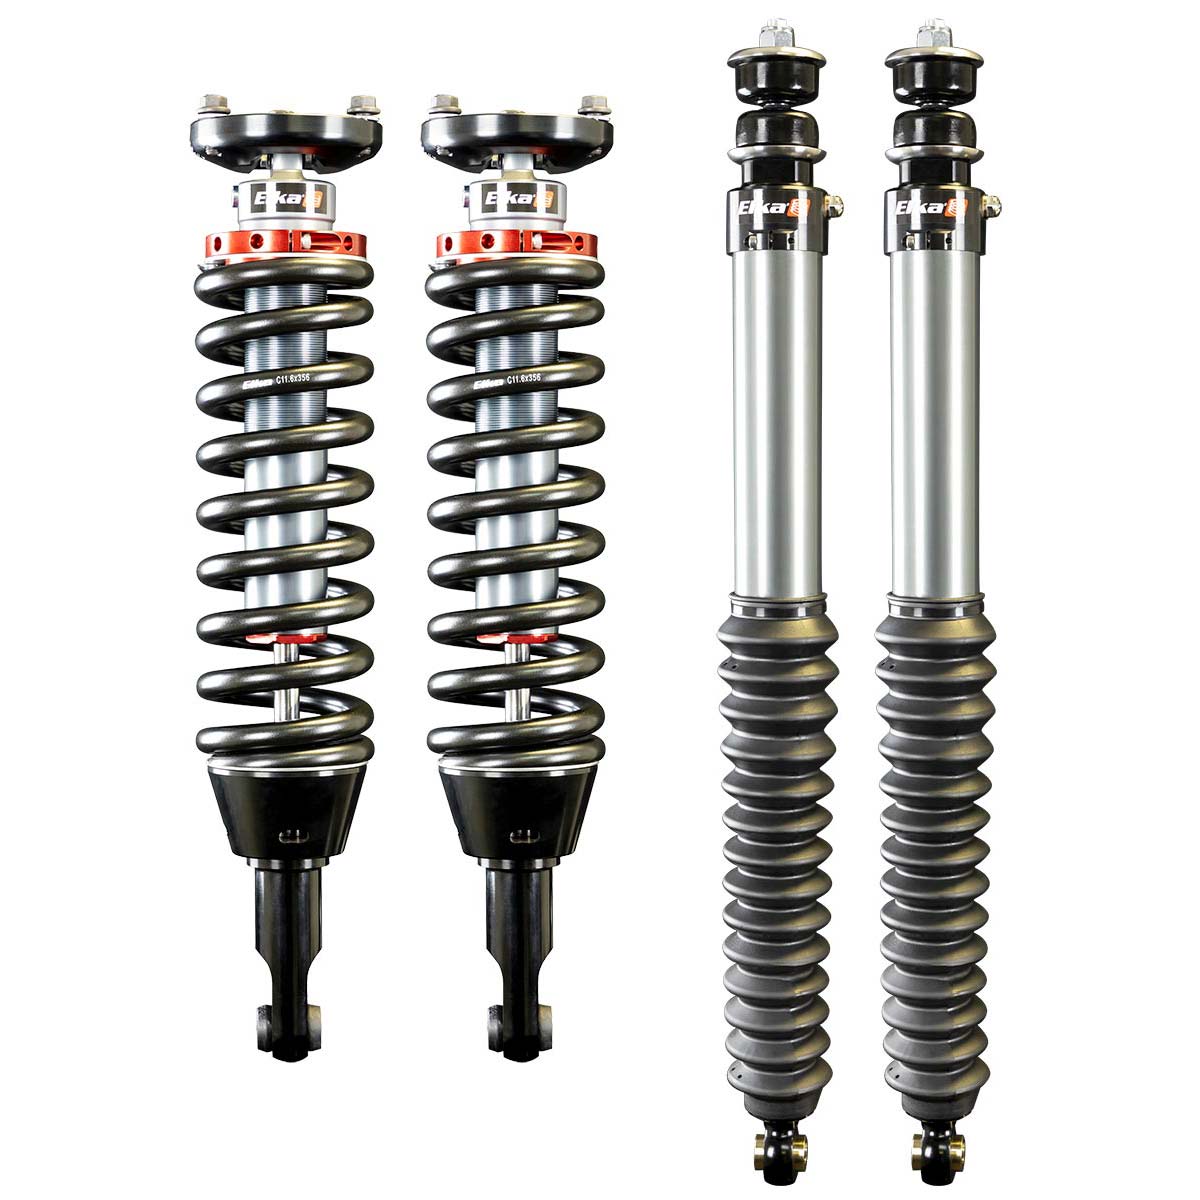 Elka 2.0 IFP FRONT & REAR SHOCKS KIT for TOYOTA 4RUNNER, 2010 to 2020 (with KDSS) (2 in. to 3 in. lift)